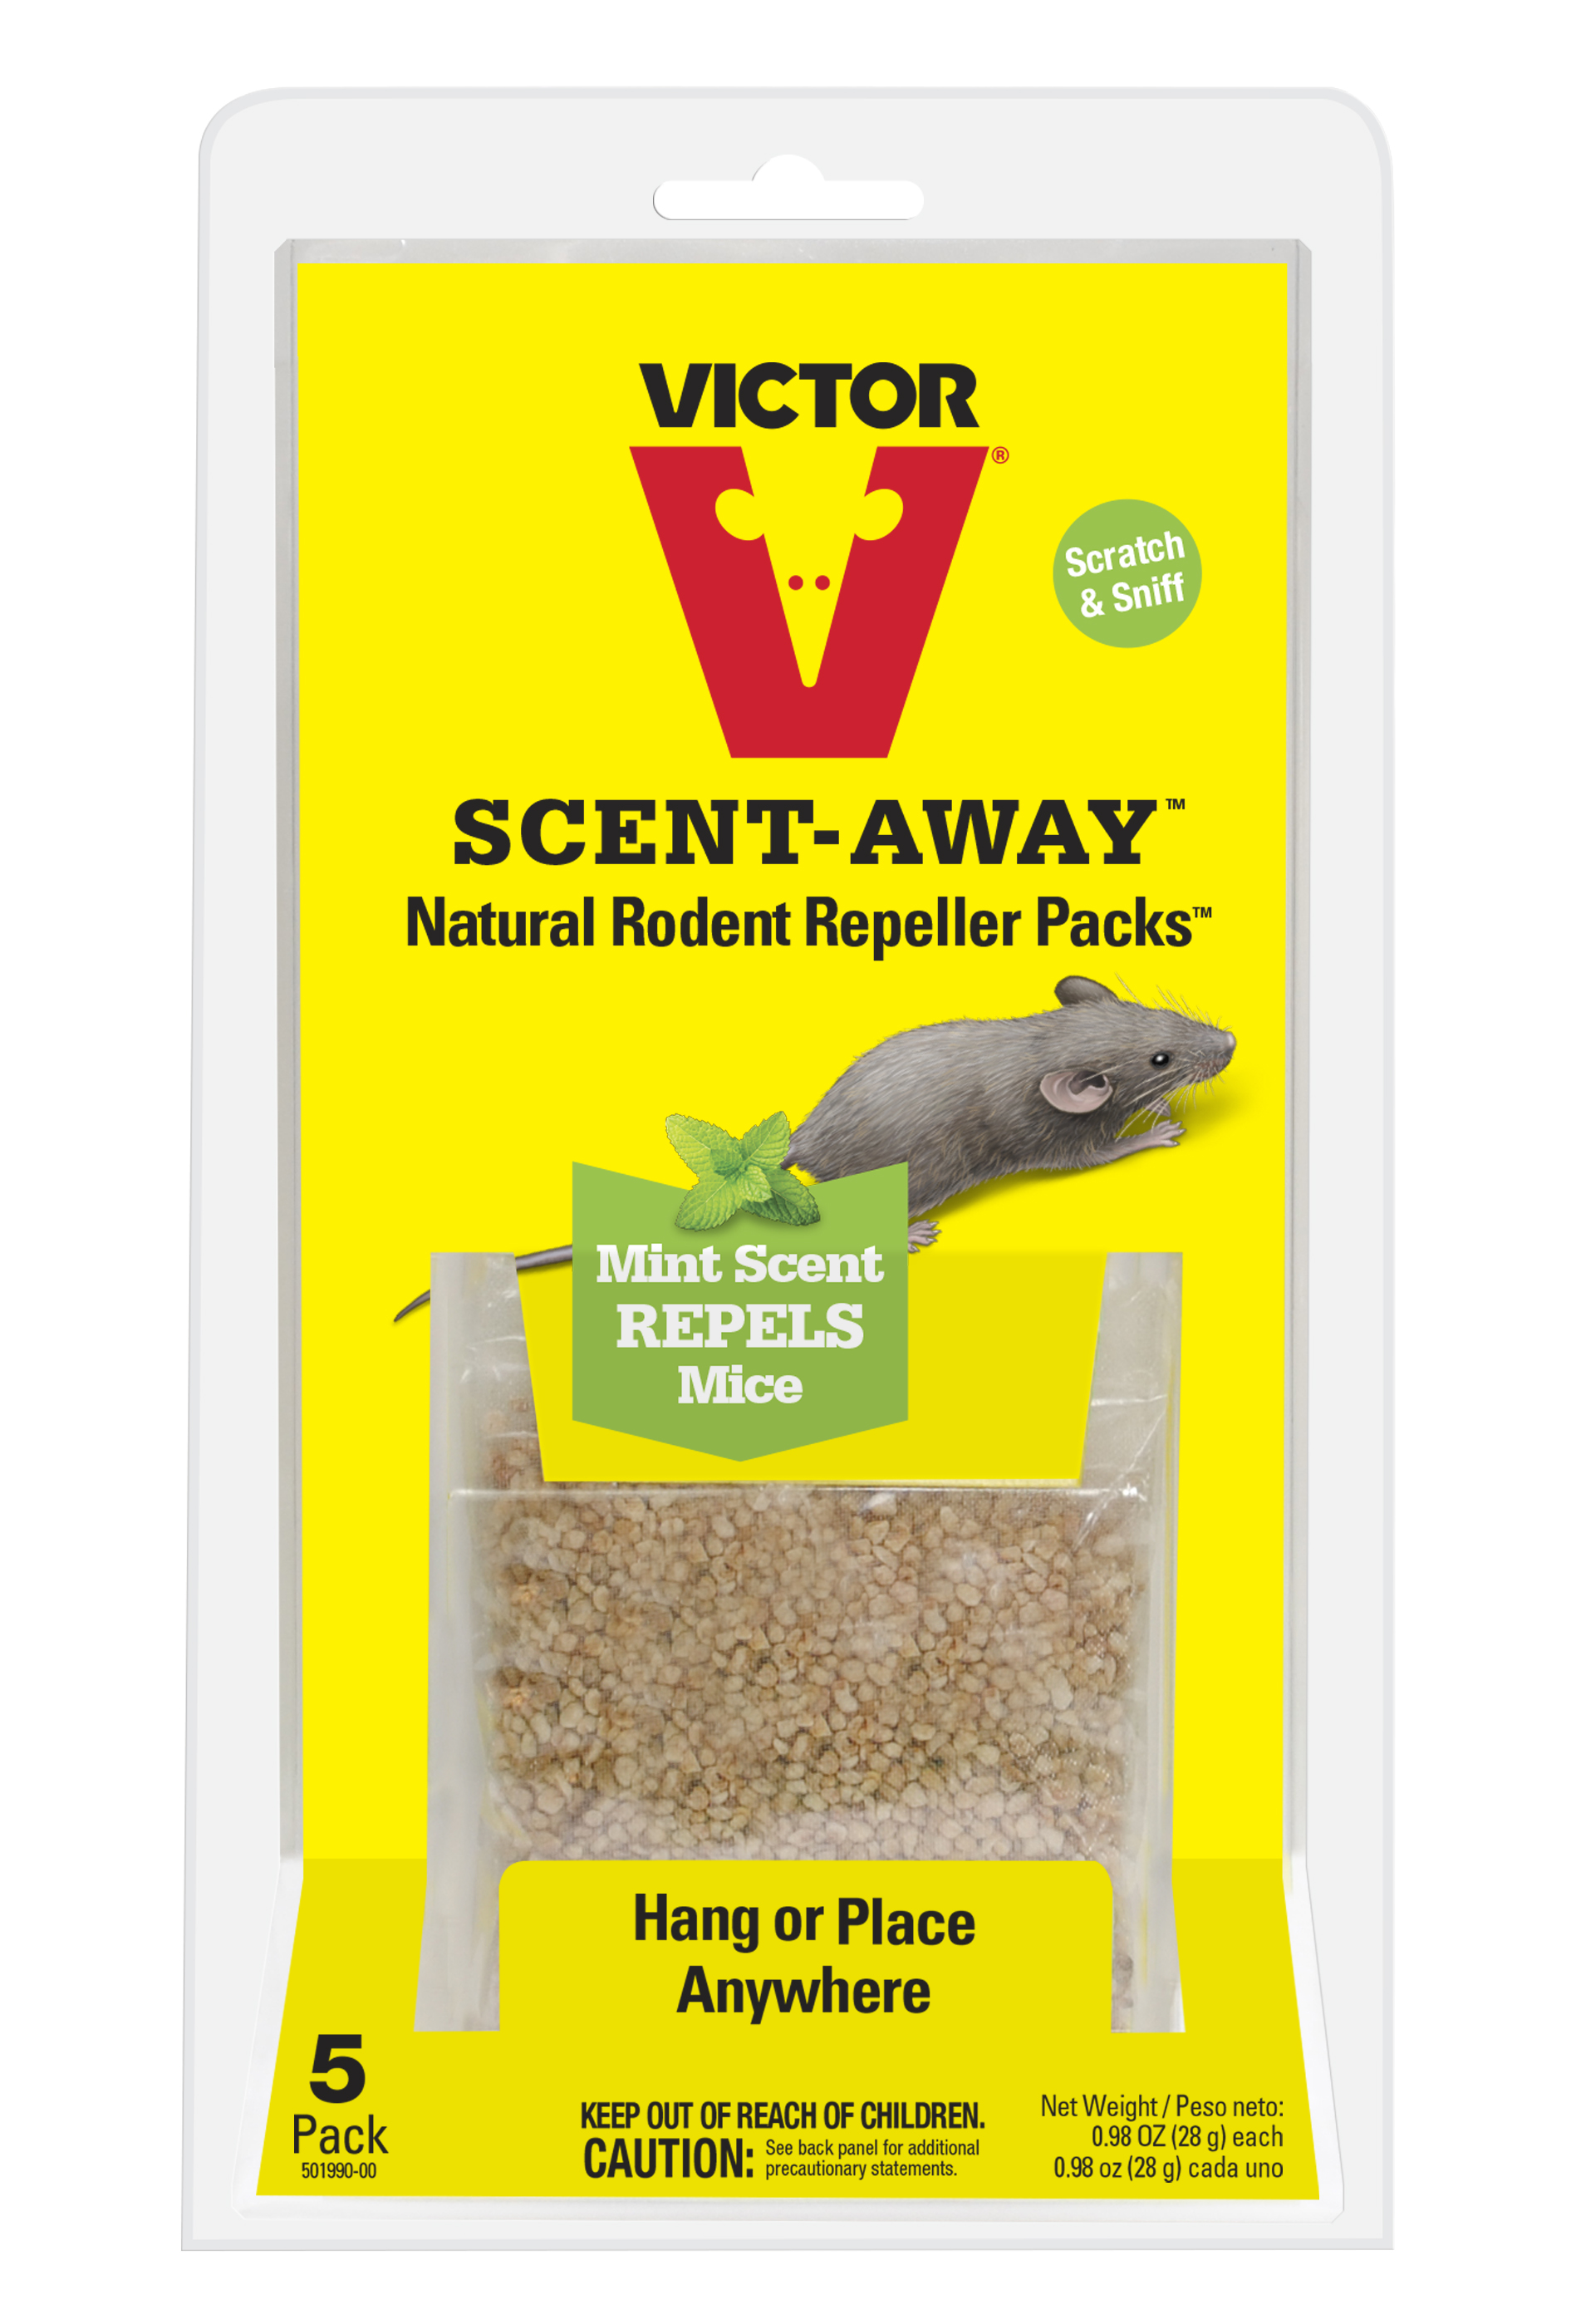 Victor® Scent-Away™ Natural Rodent Repeller Packs™ provide a clean and simple solution for getting rid of mice for up to an entire month.